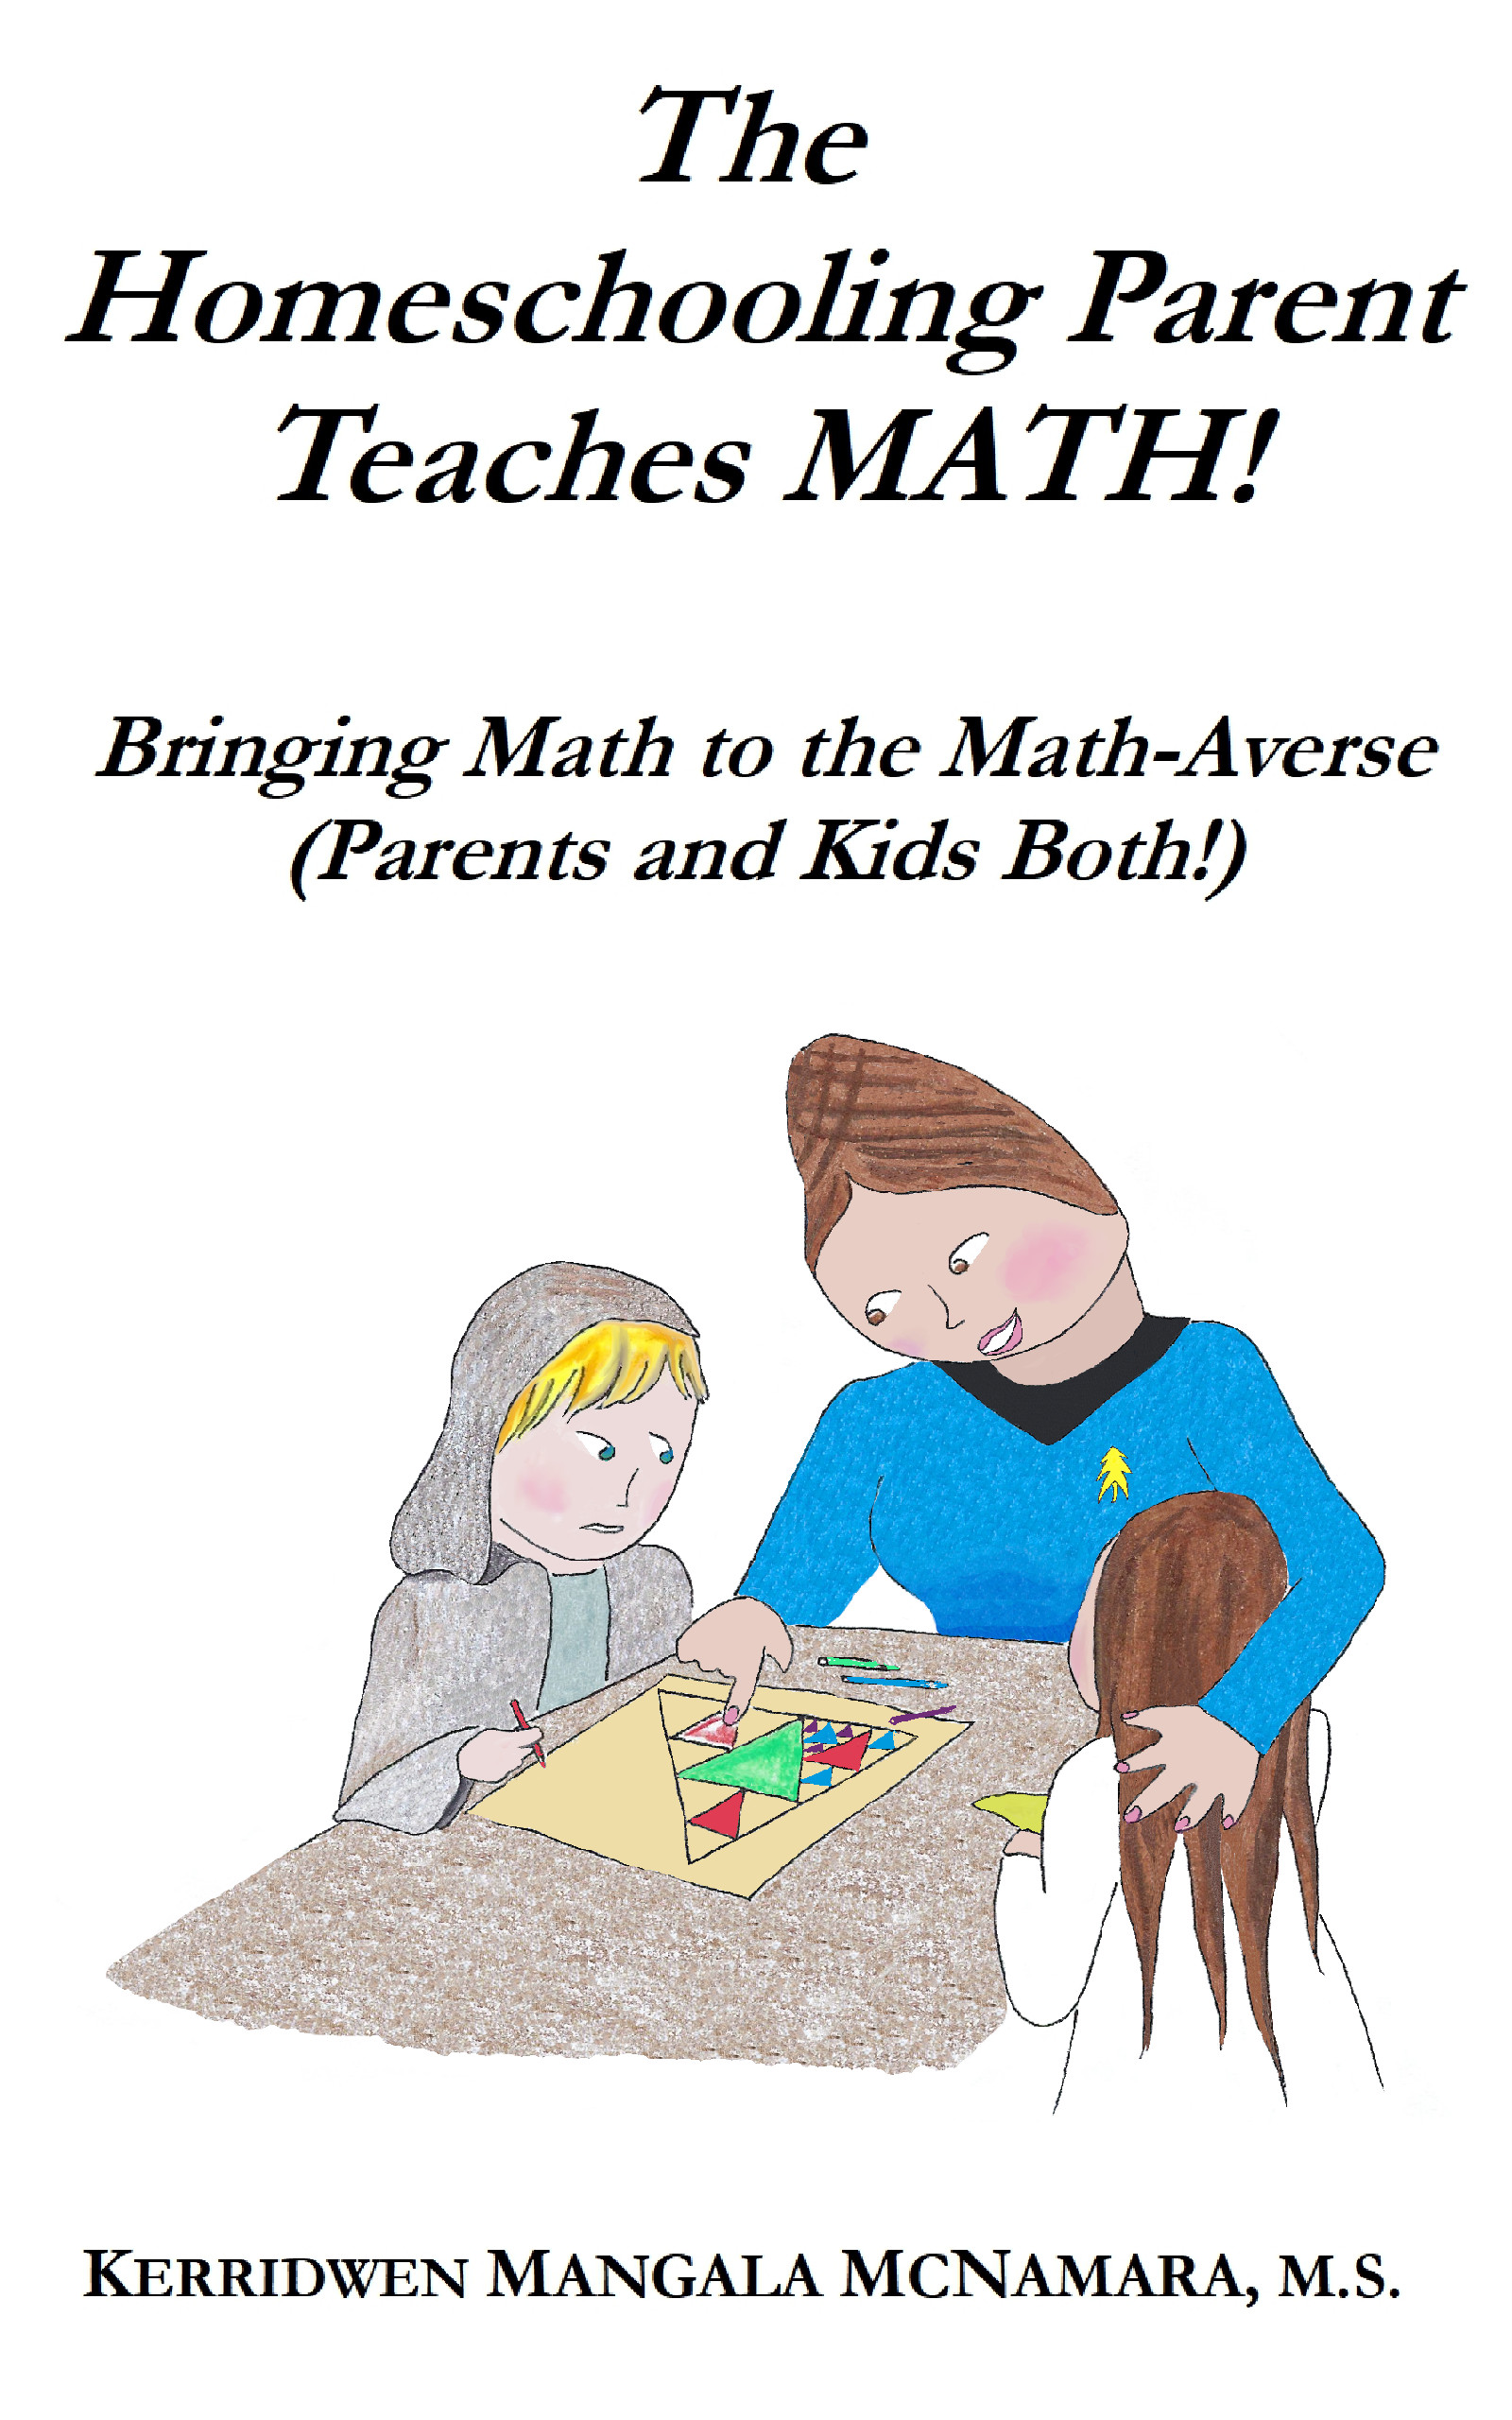 Cover of The Homeschooling Parent Parent Teaches MATH! Bringing Math to the Math-Averse (Parents and Kids Both!)